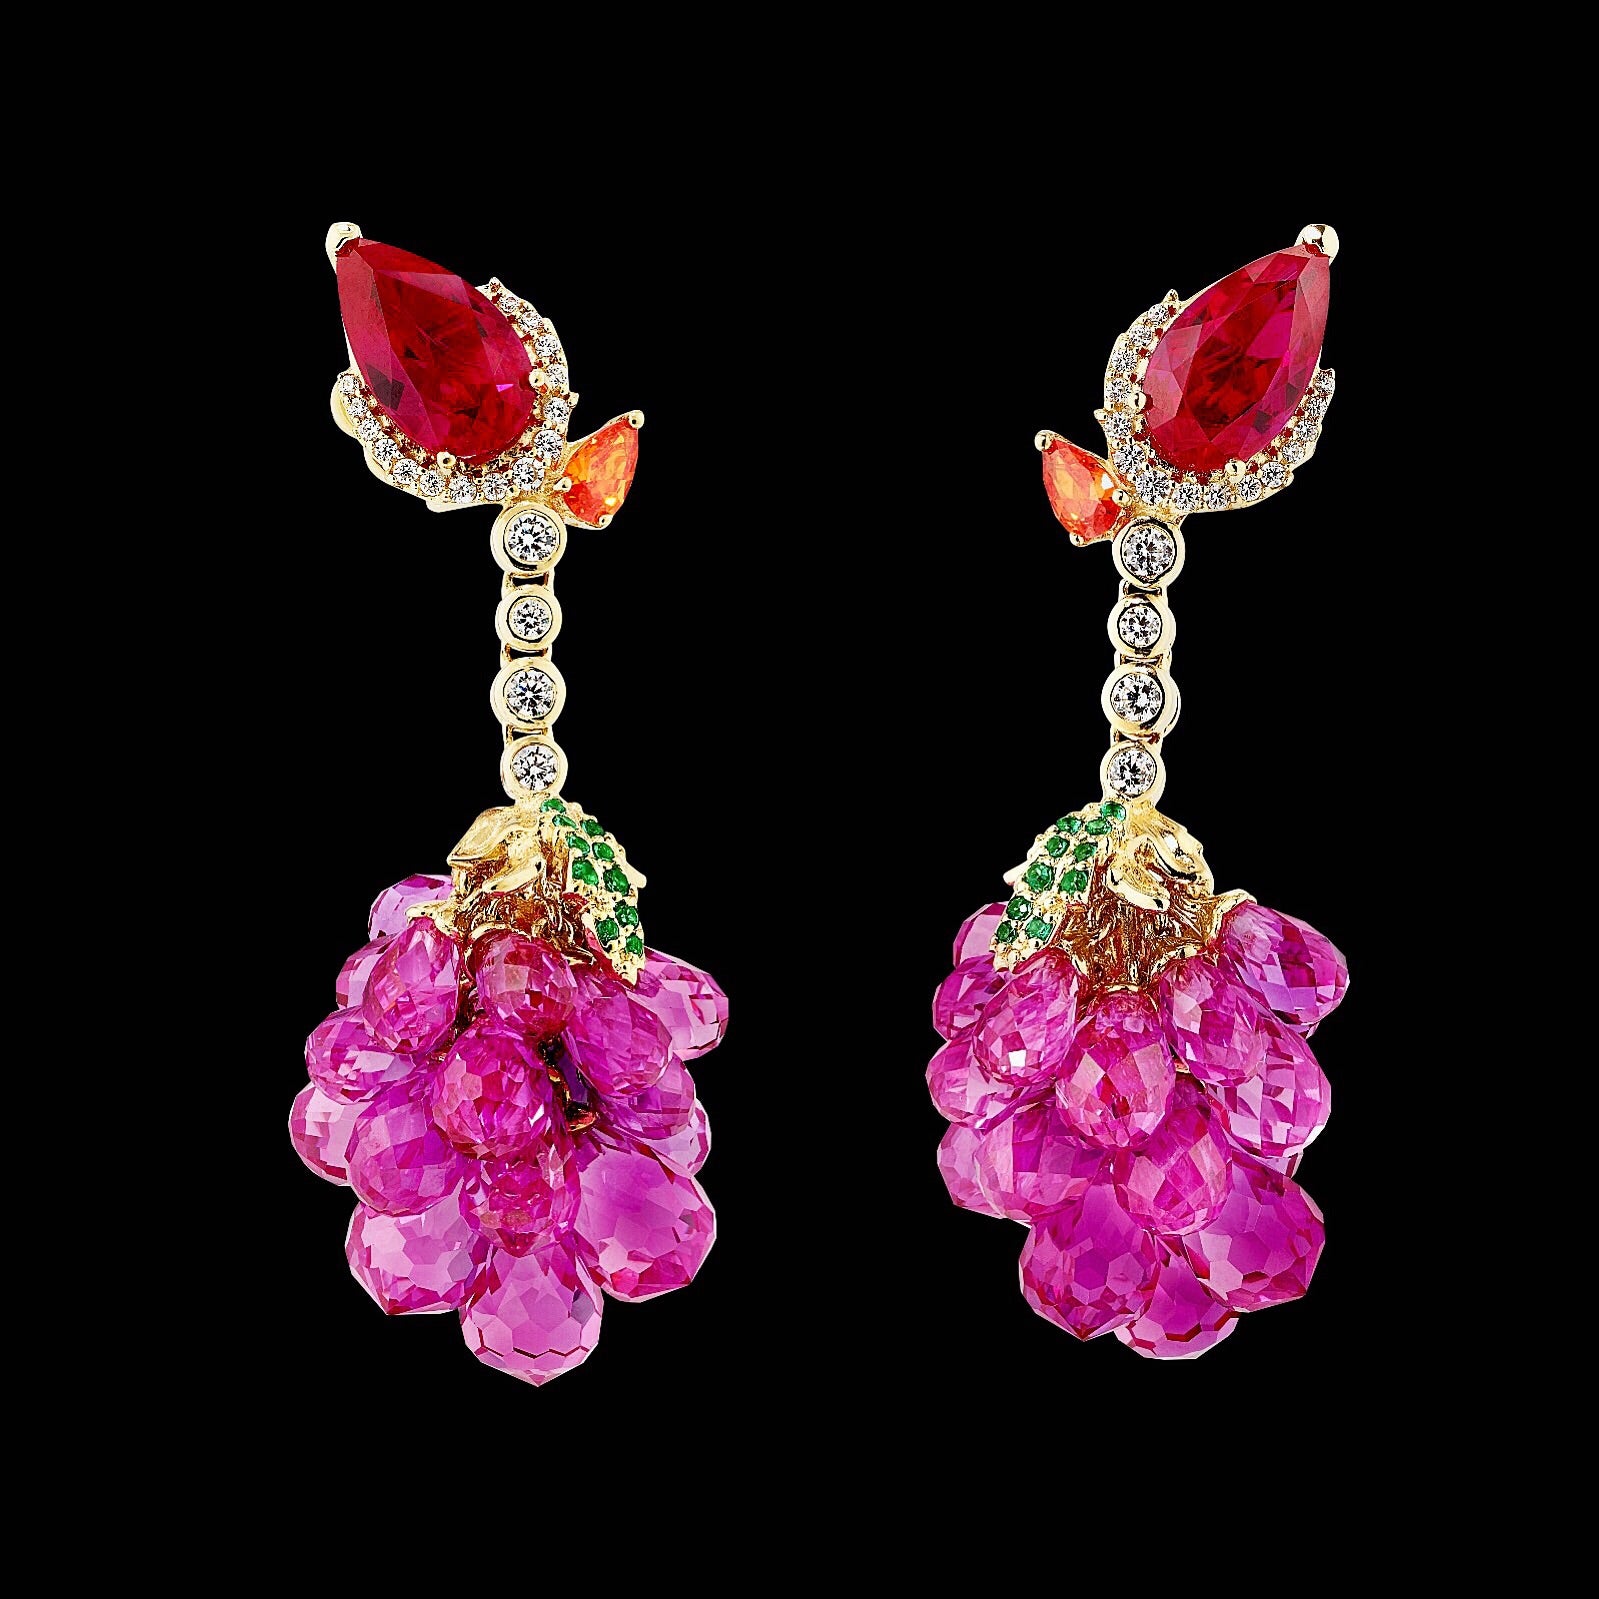 Raspberry Earrings, Earring, Anabela Chan Joaillerie - Fine jewelry with laboratory grown and created gemstones hand-crafted in the United Kingdom. Anabela Chan Joaillerie is the first fine jewellery brand in the world to champion laboratory-grown and created gemstones with high jewellery design, artisanal craftsmanship and a focus on ethical and sustainable innovations.